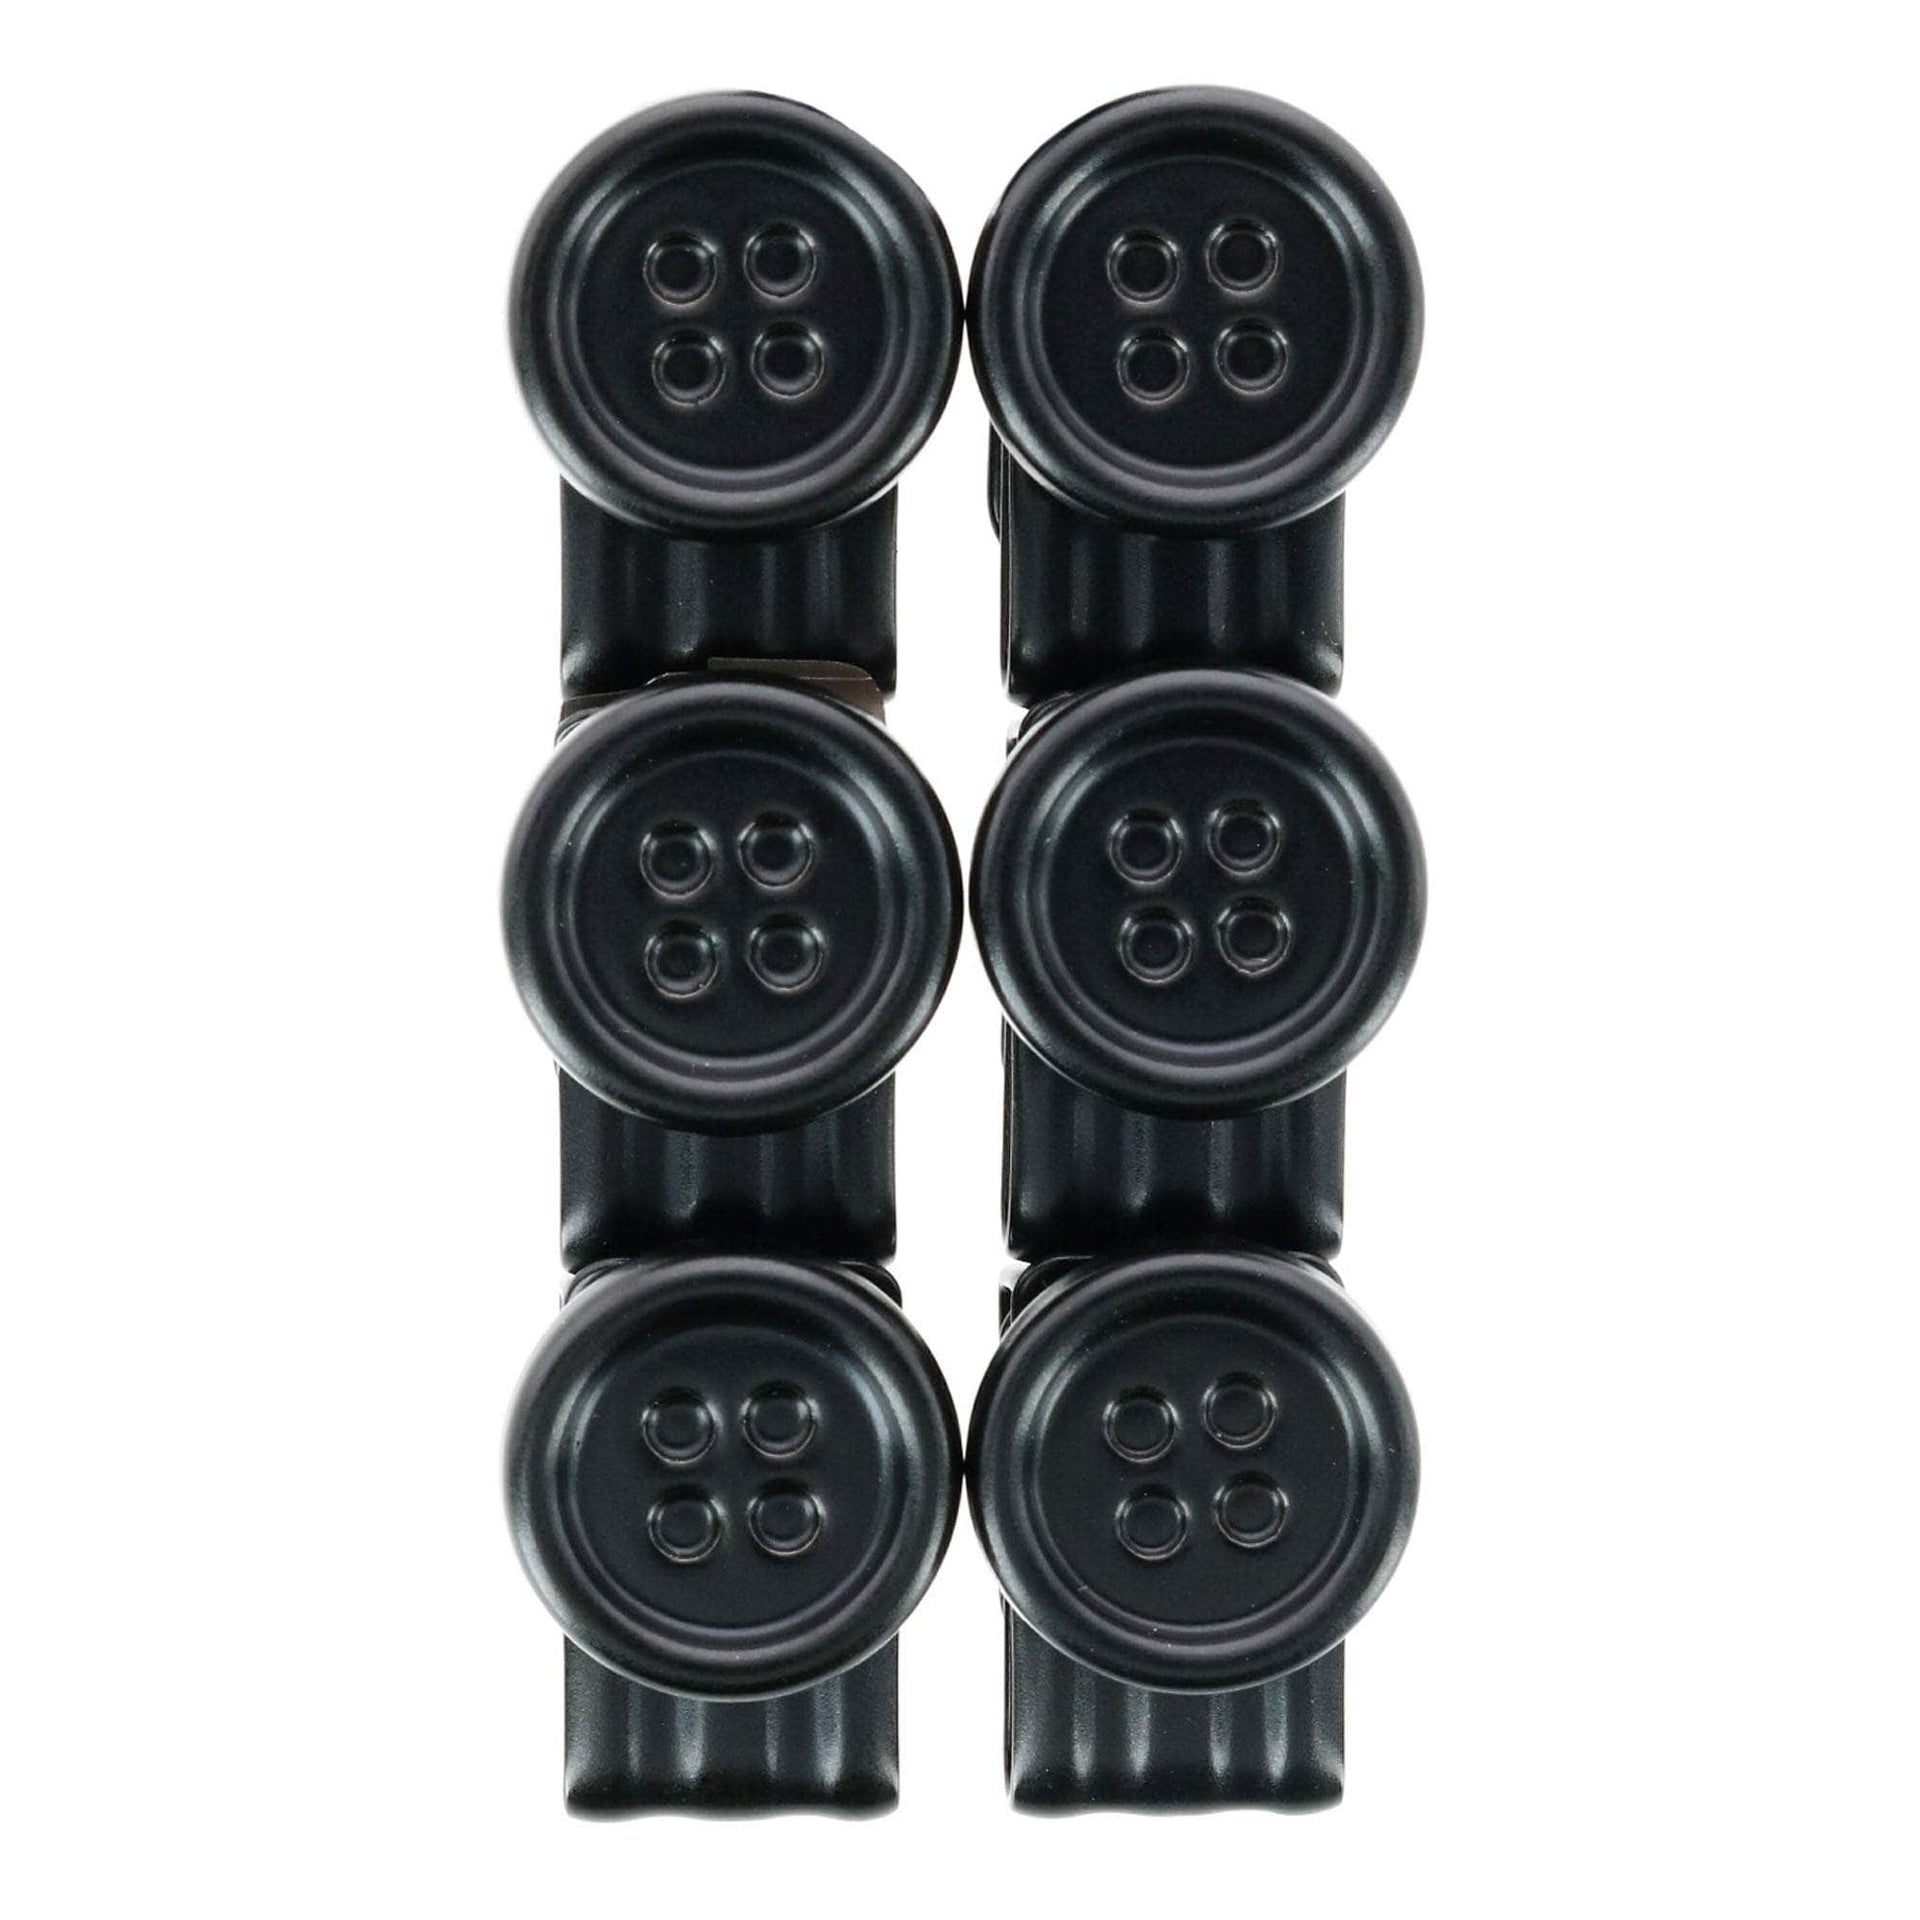 No Sew Moveable Button End Brace Clips (Set of 6) by Trafalgar Men's  Accessories